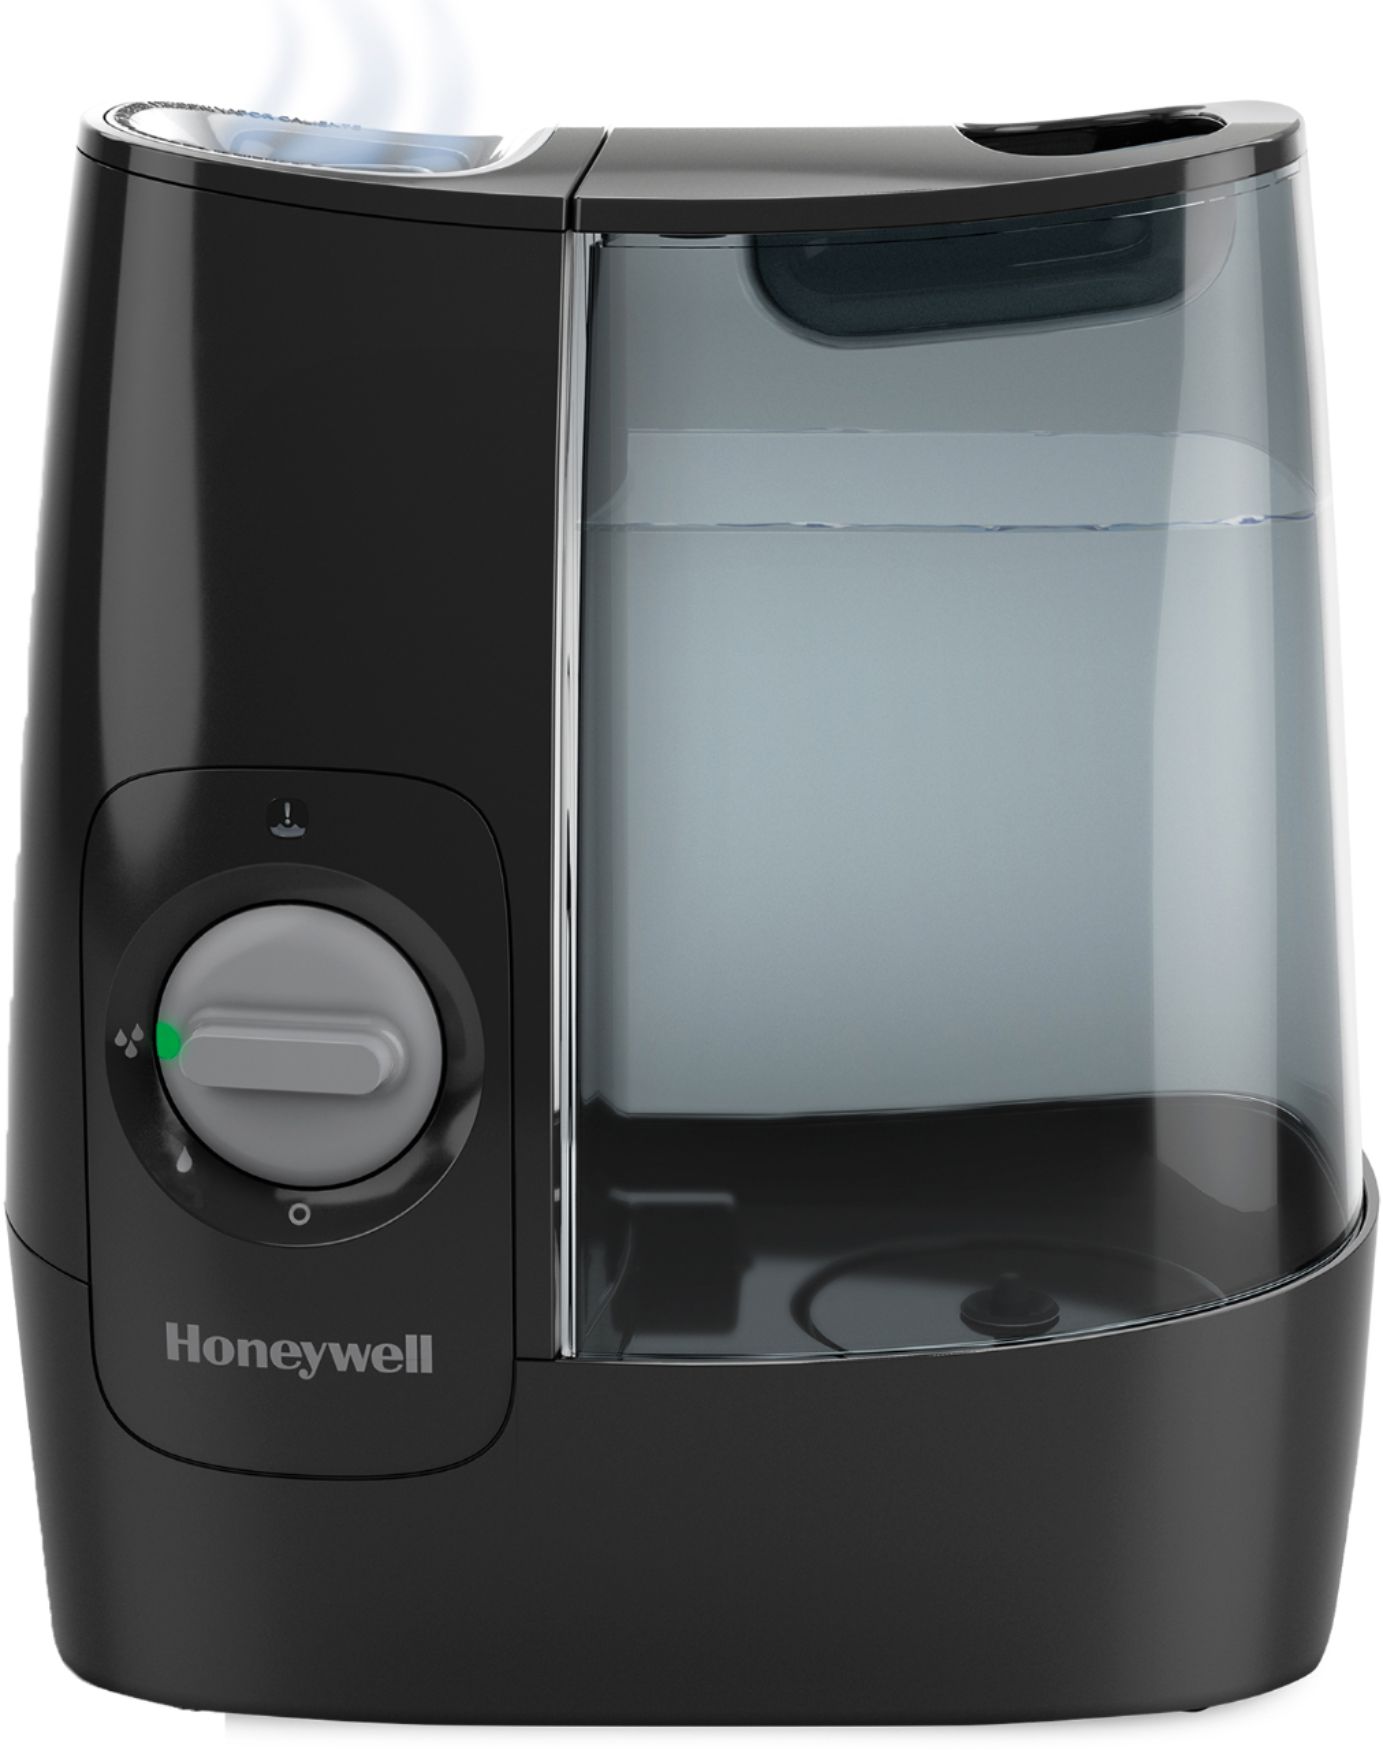 Honeywell HWM845 Warm Mist Humidifier with Essential oil cup, Filter Free - Black